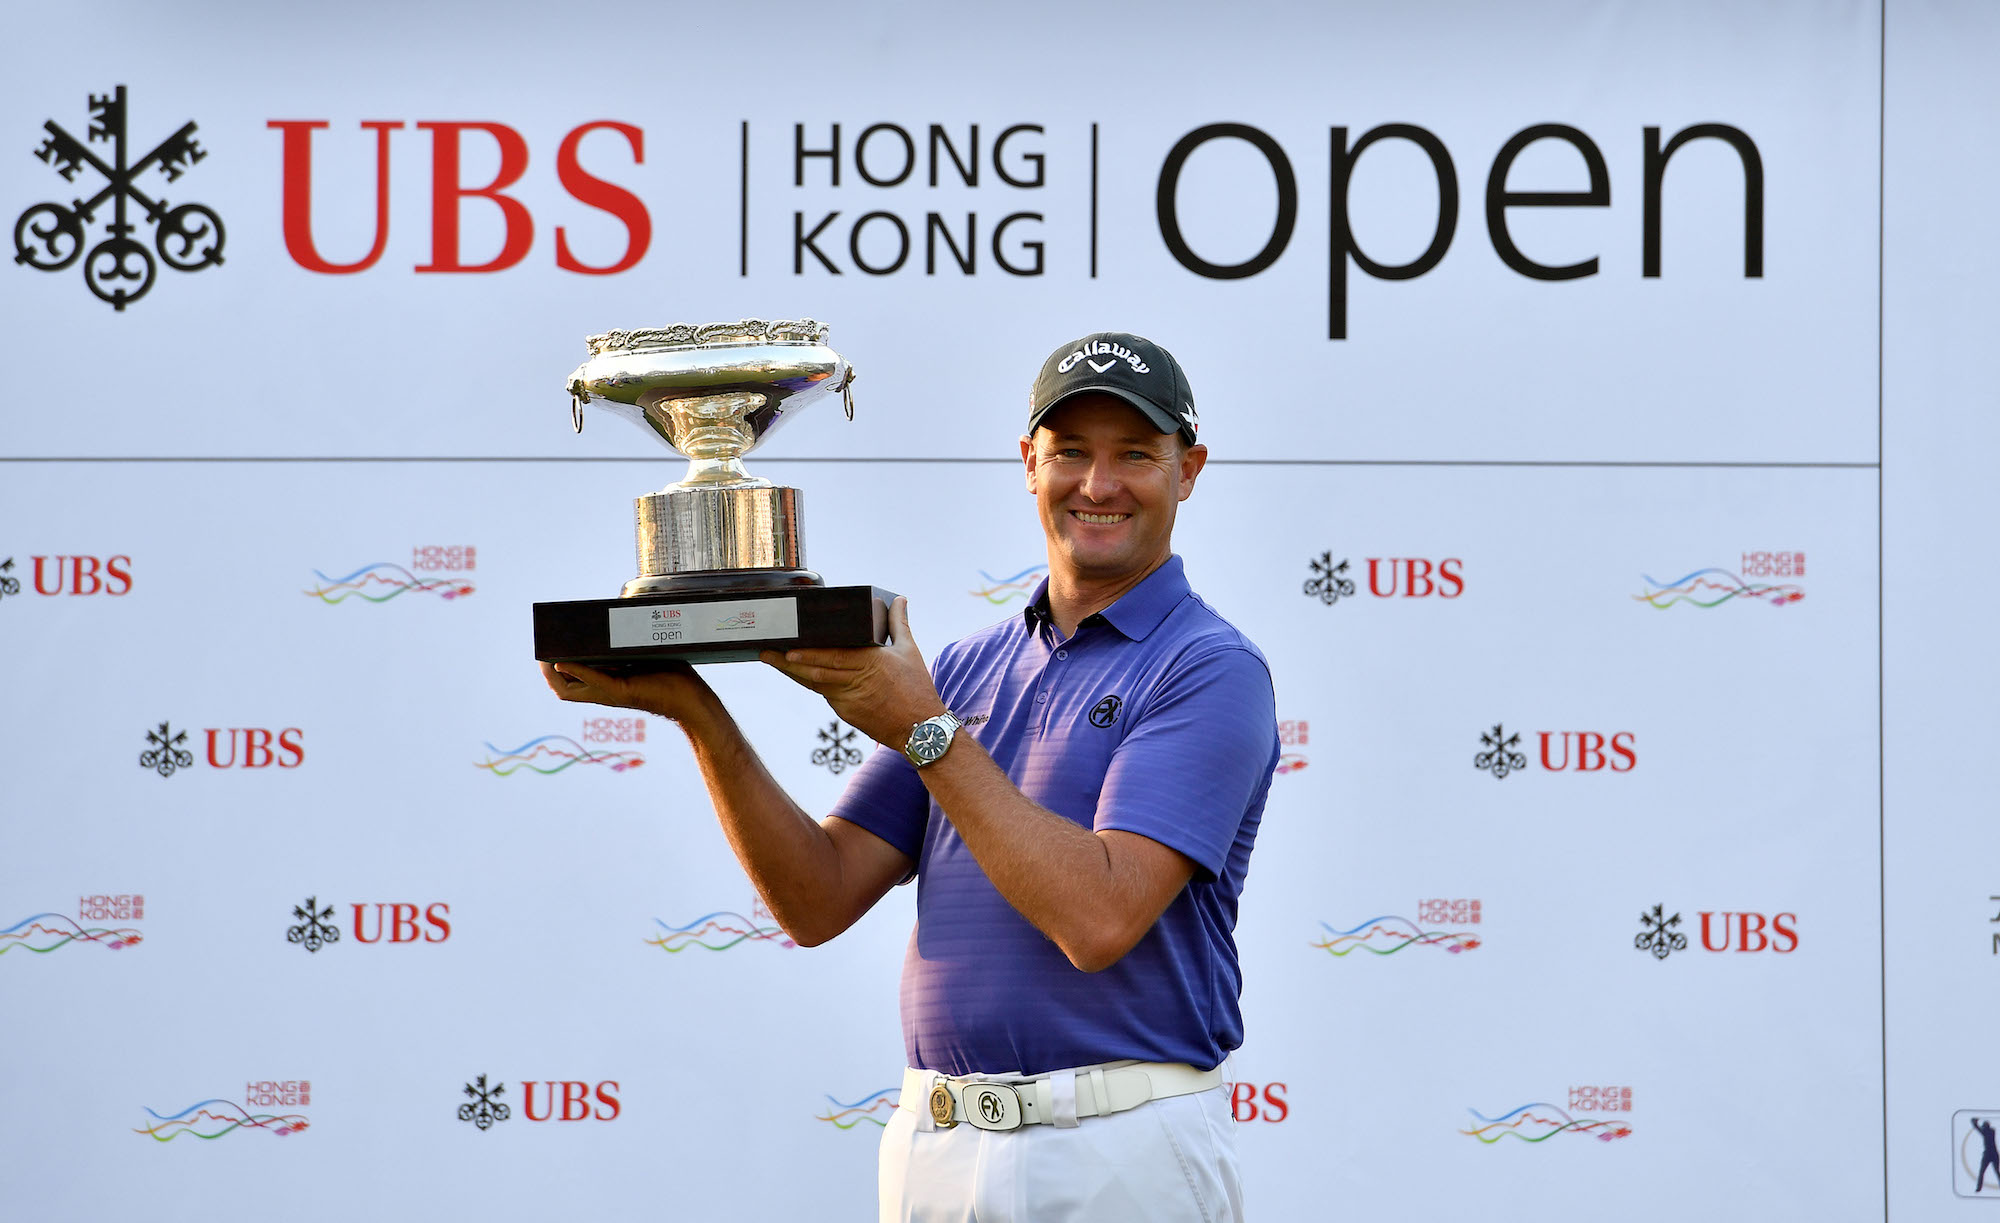 BRILLIANT BRAZEL SINKS LATE BIRDIE FOR DRAMATIC WIN AT UBS HONG KONG OPEN